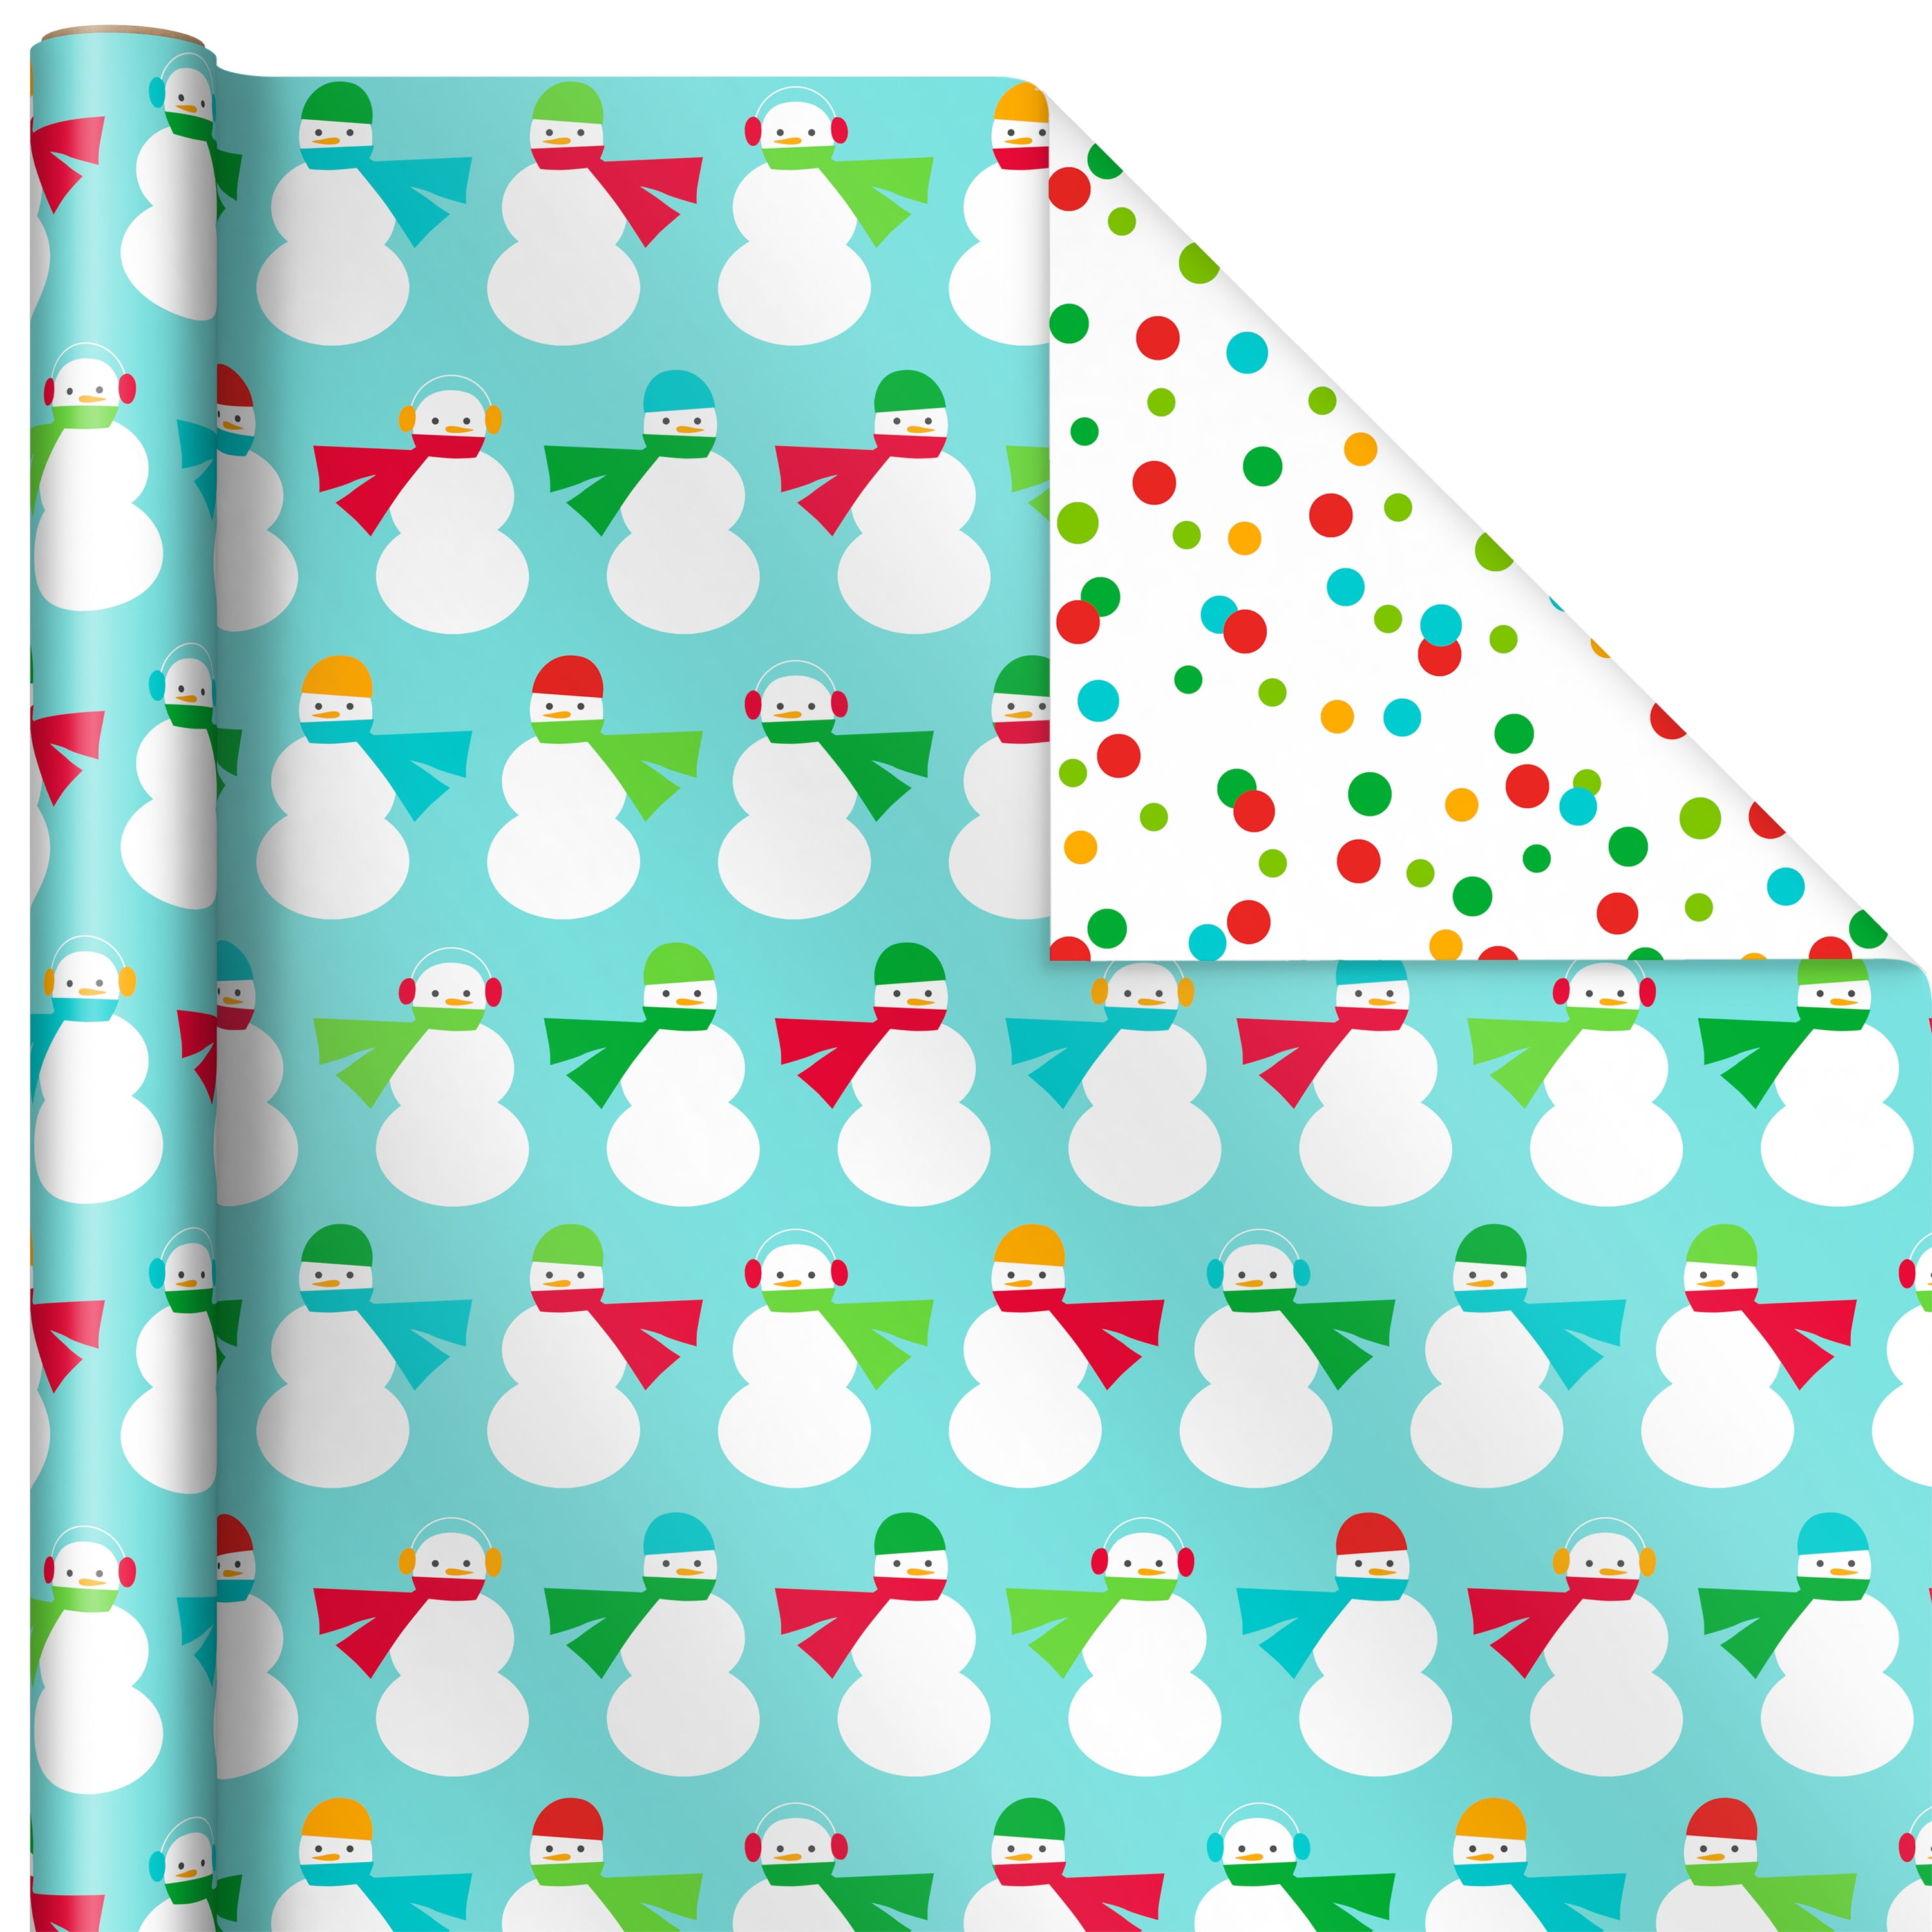 Hallmark Reversible Kids Birthday Wrapping Paper (3 Rolls: 120 sq. ft.  ttl.) Monsters and Unicorns, Polka Dots, Chevron, Pink, Teal, Blue, Red